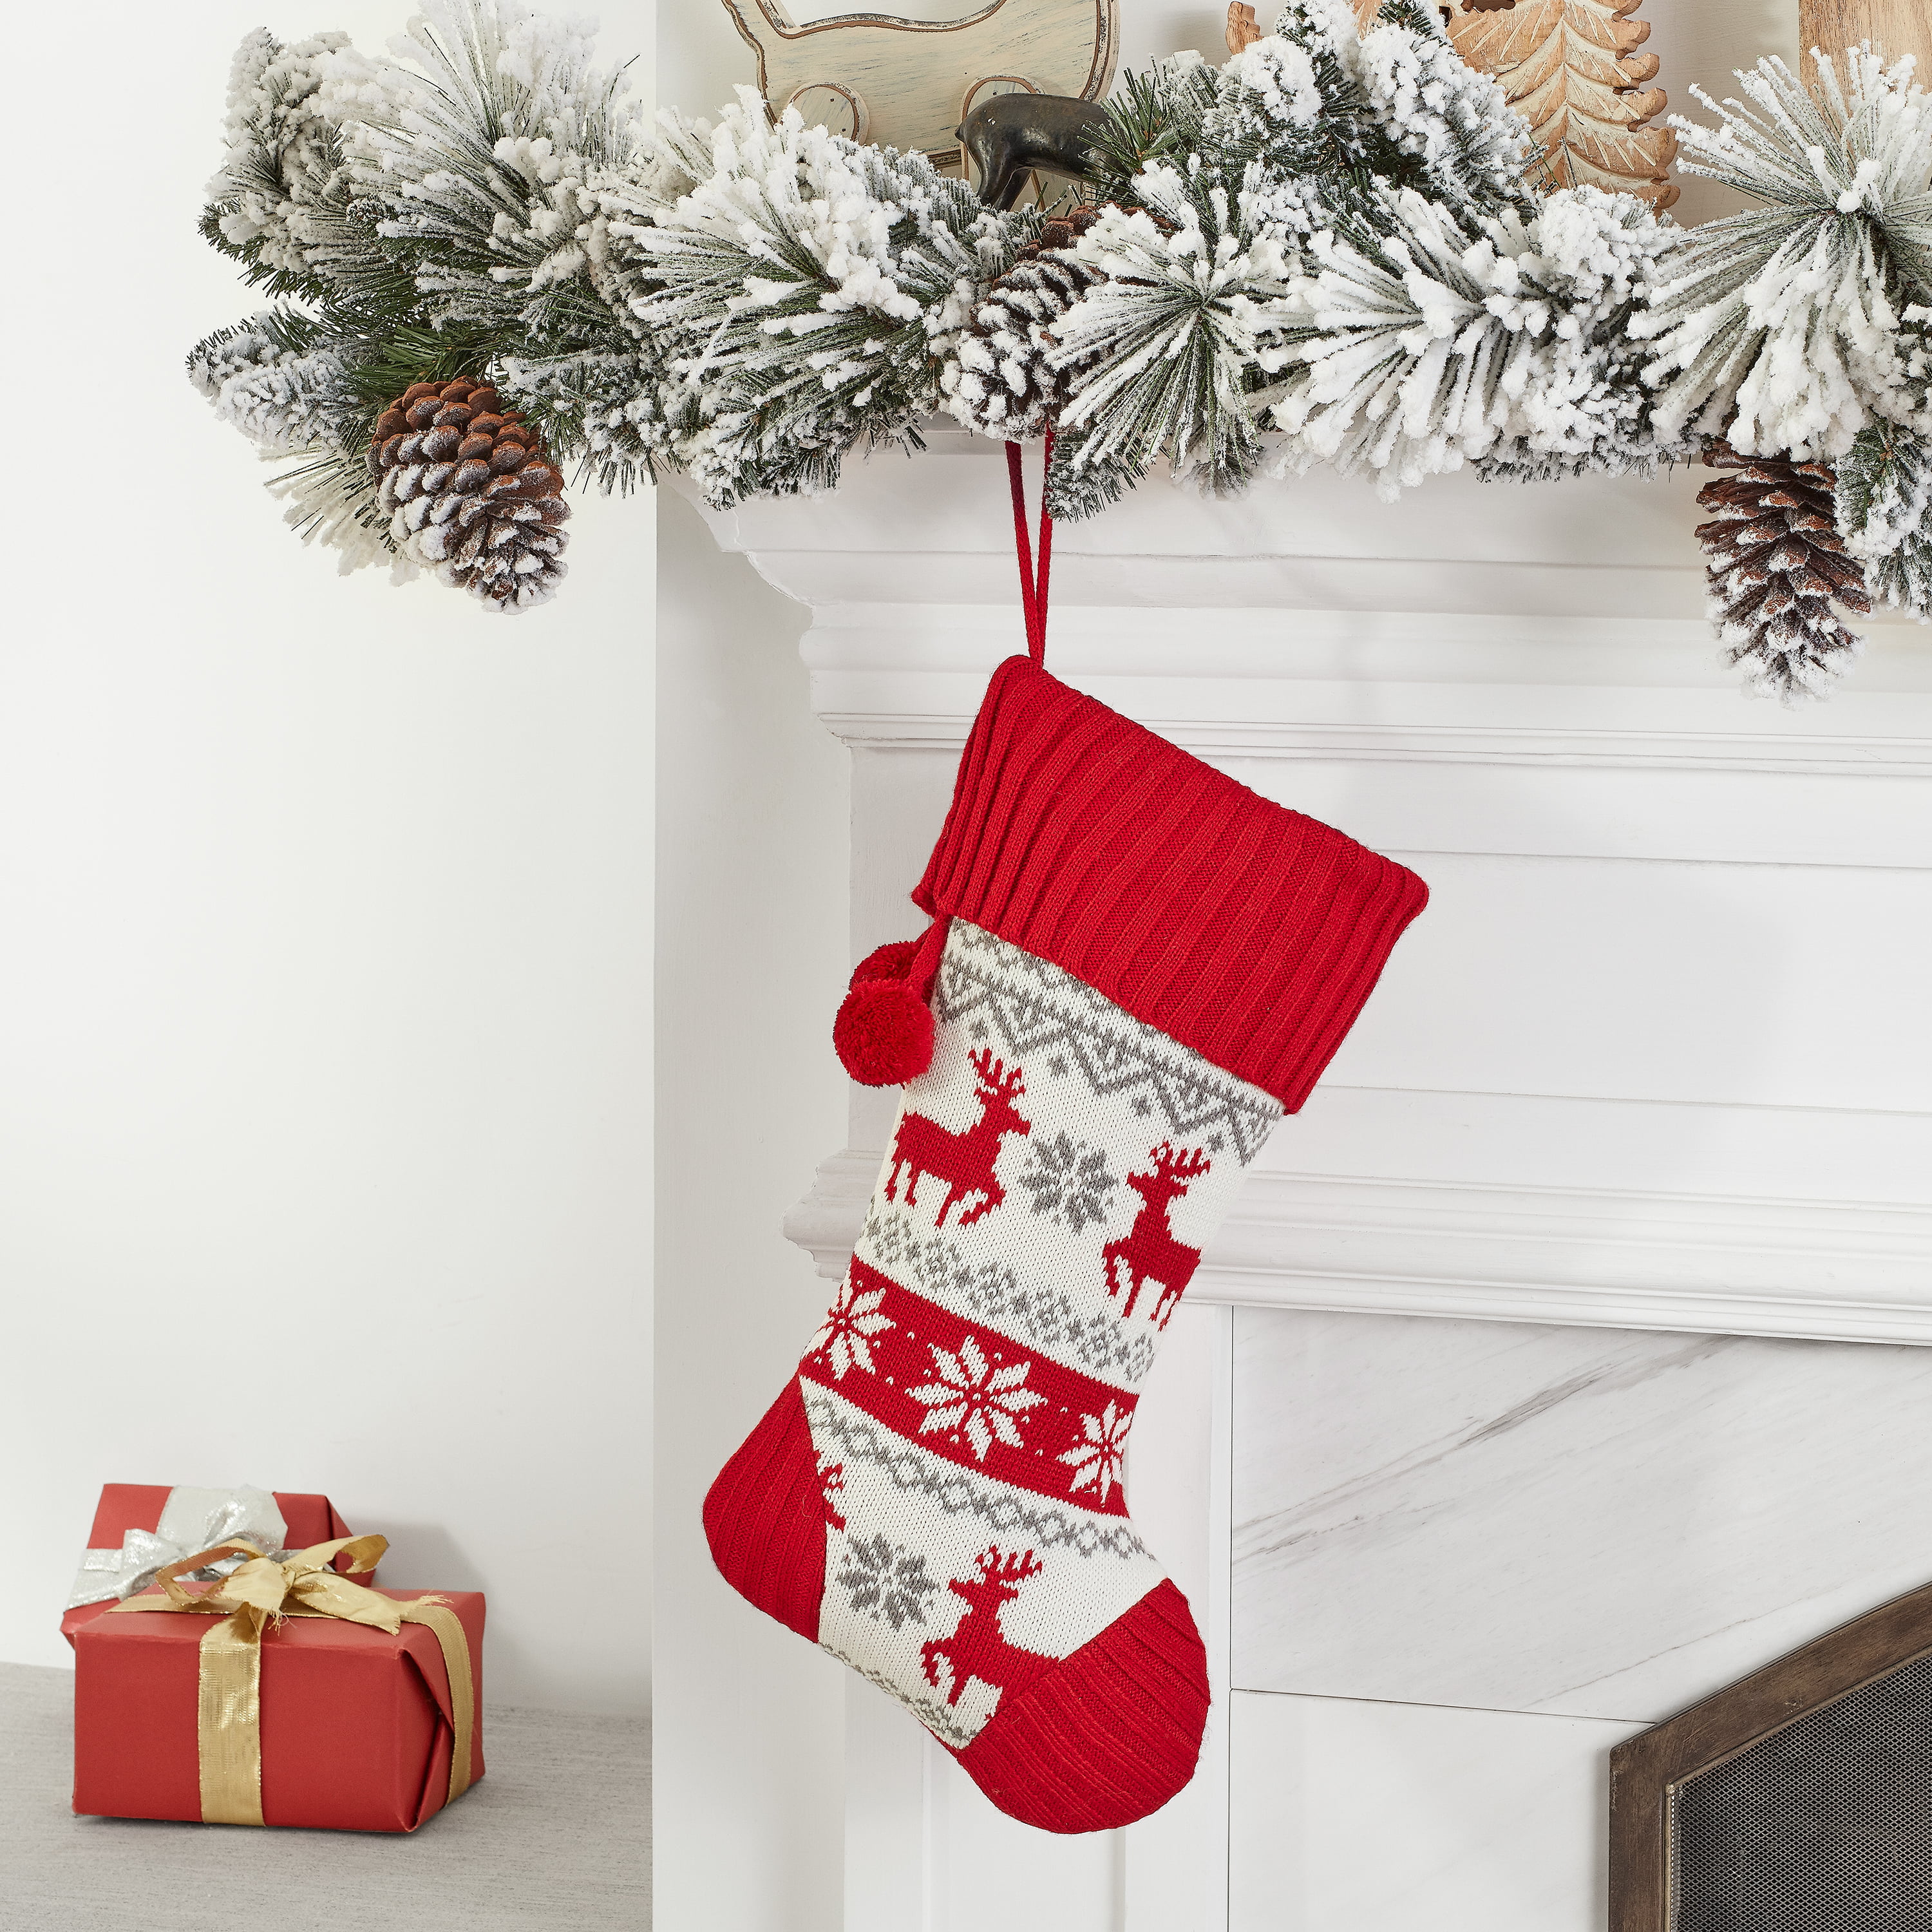 Personalized Reindeer Christmas Stocking – Hand Knit Holiday